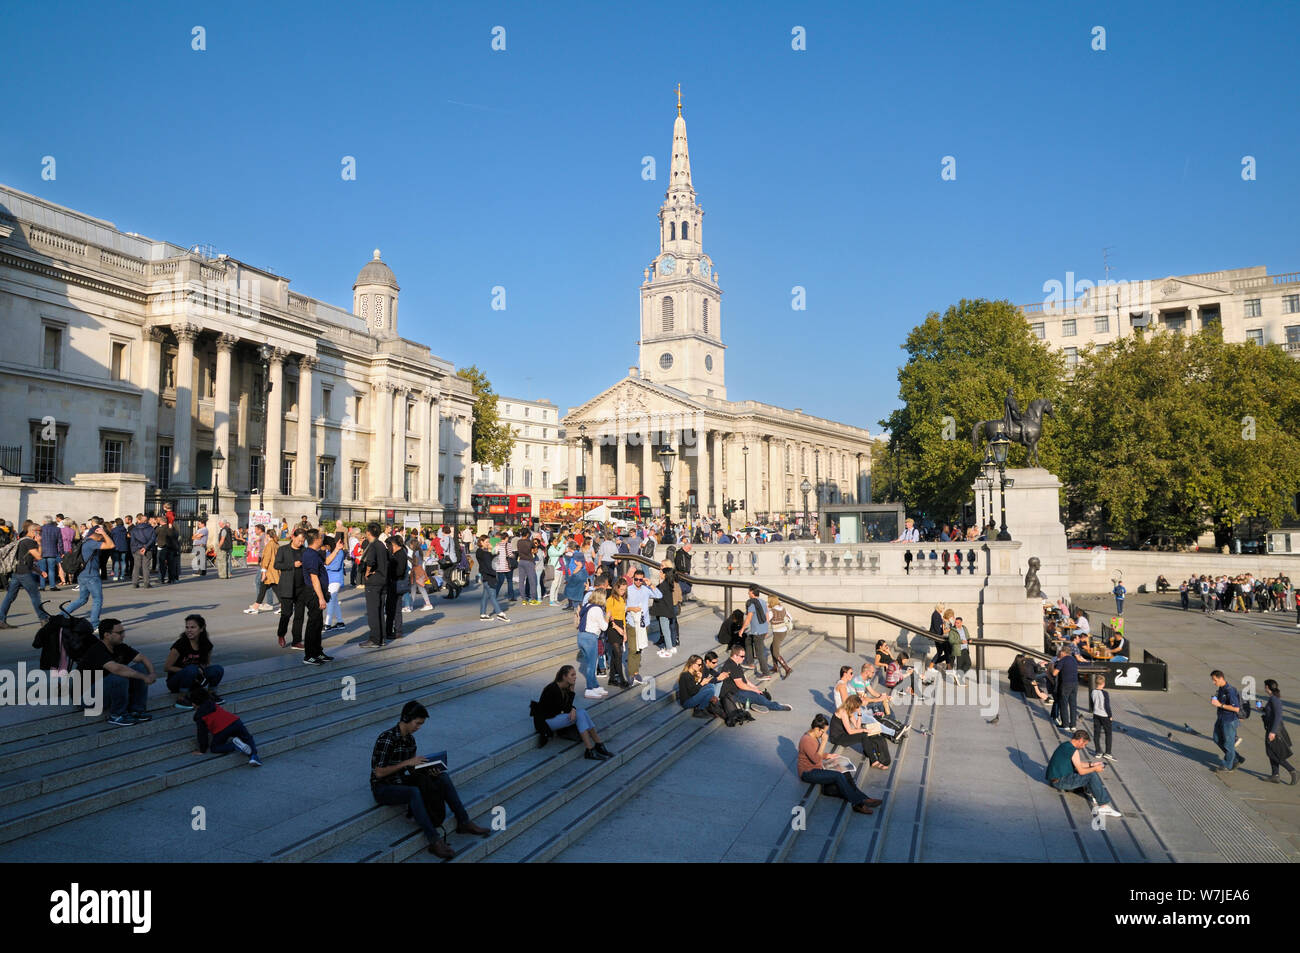 Trafalgar Square with the National Gallery and St Martin-in-the-Fields church, City of Westminster, London, England, UK Stock Photo